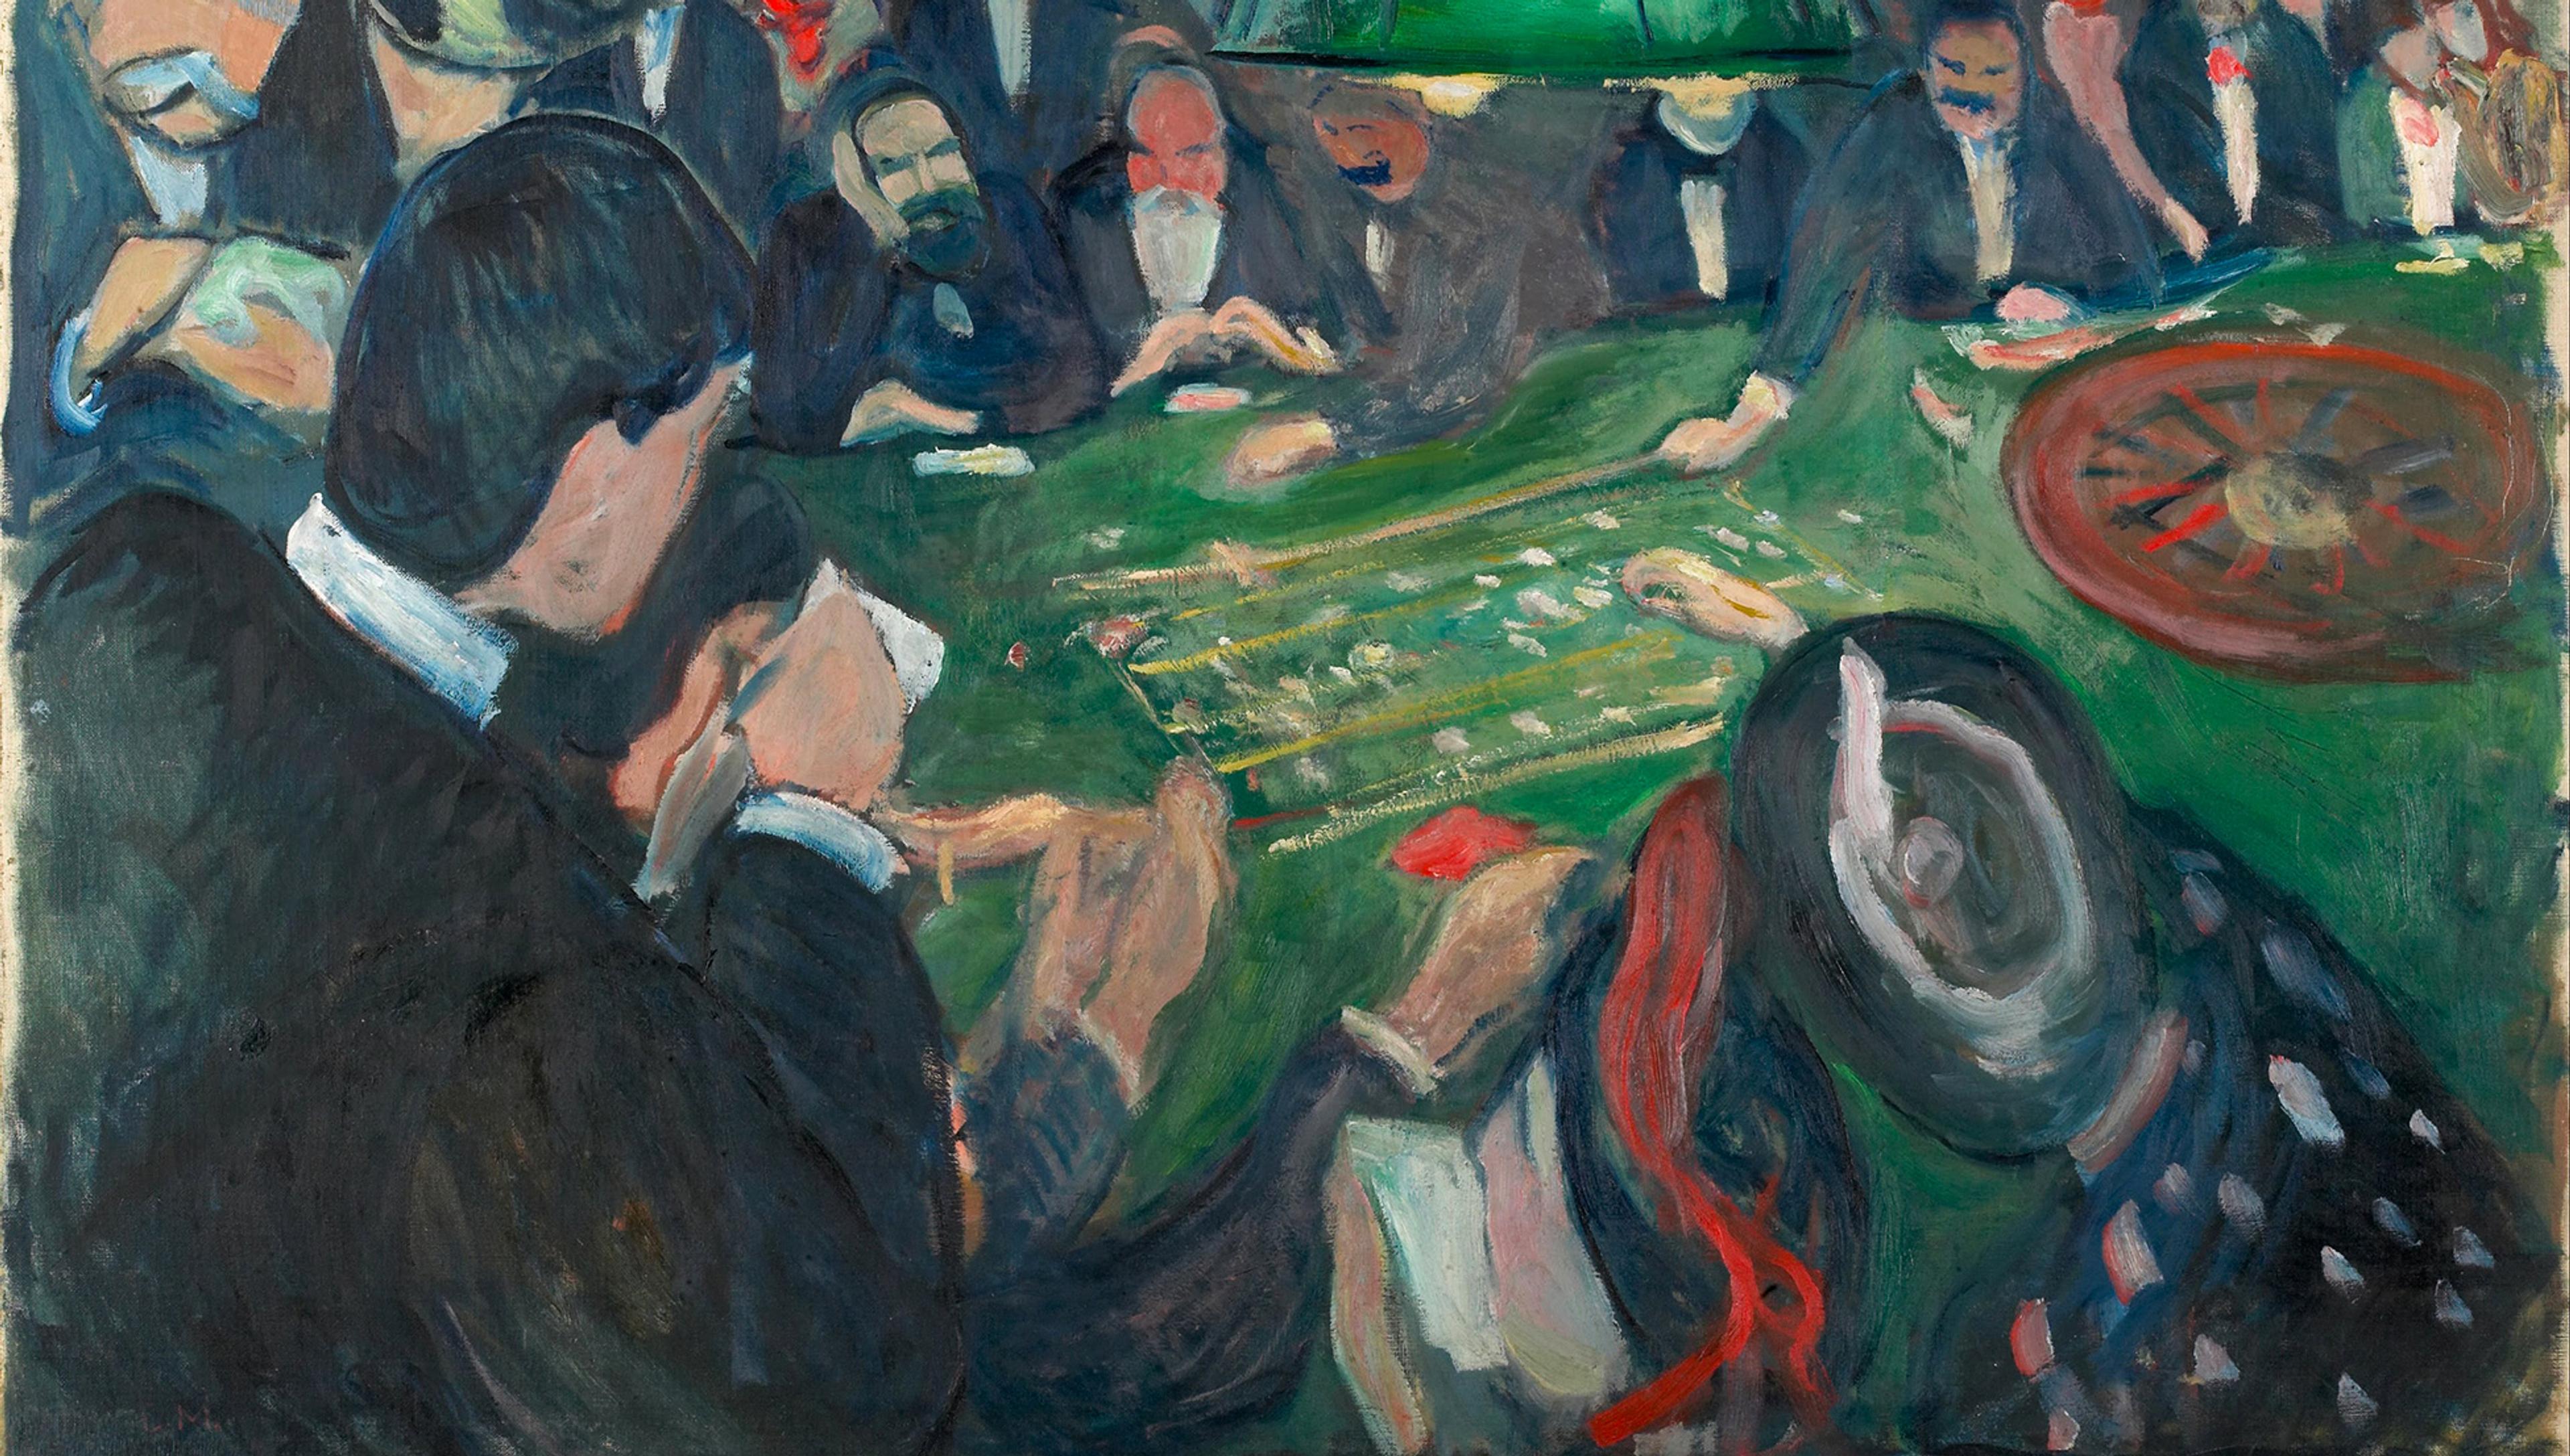 Painting depicts a casino scene with people gathered around a green roulette table. The players are engaged, focused on the game. The roulette wheel is visible on the right side, and a green lamp hangs above. The scene is vibrant, with expressive brushstrokes and vivid colours.